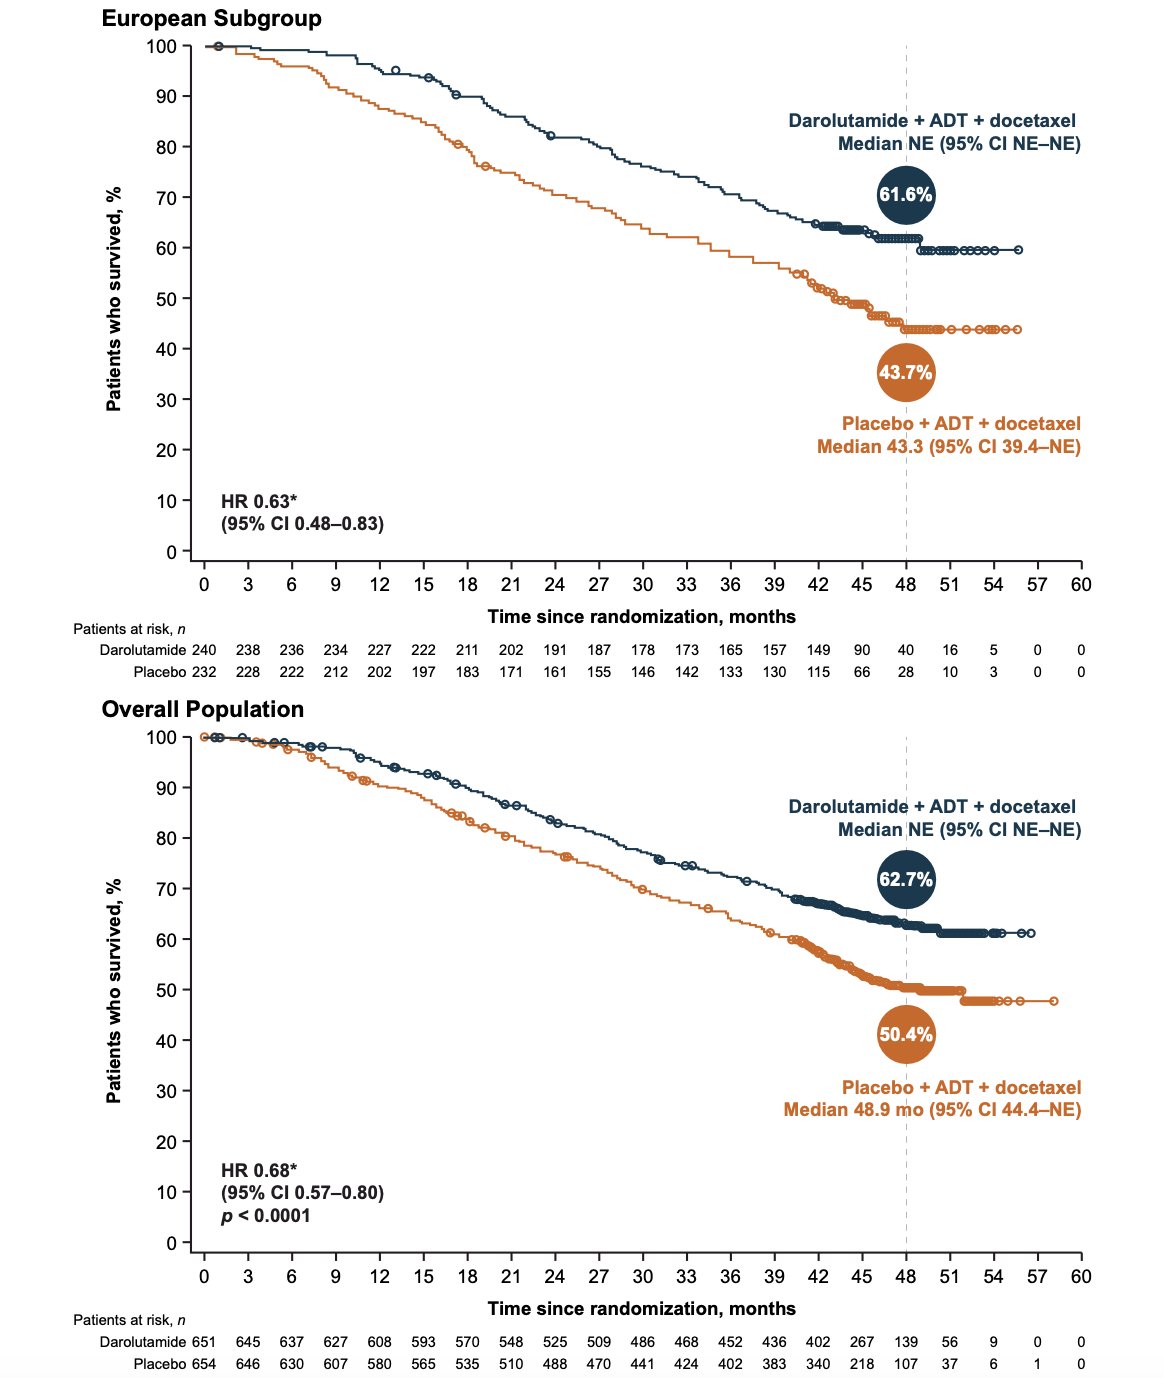 European patients, darolutamide + ADT + docetaxel increased overall survival, with a 37% reduction in the risk of death vs placebo + ADT + docetaxel (HR 0.63, 95% CI 0.48–0.83), with an improvement in 4-year survival rate (61.6% vs 43.7%), consistent with the overall population